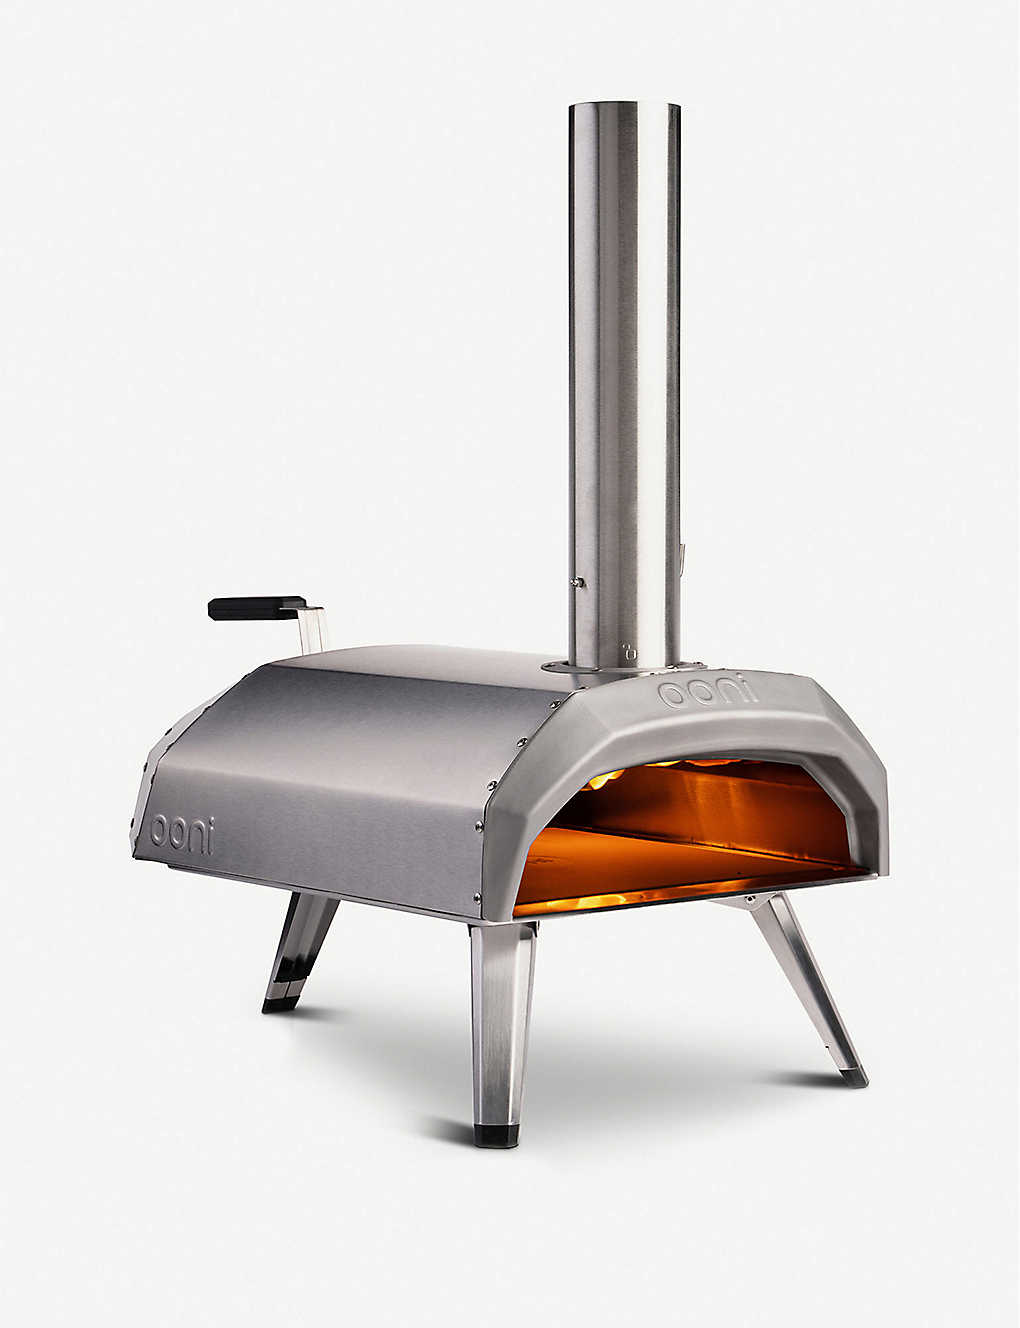 OONI 롼 å  㥳ե䡼 ݡ֥ ԥ ֥ Karu wood and charcoal-fired portable pizza oven